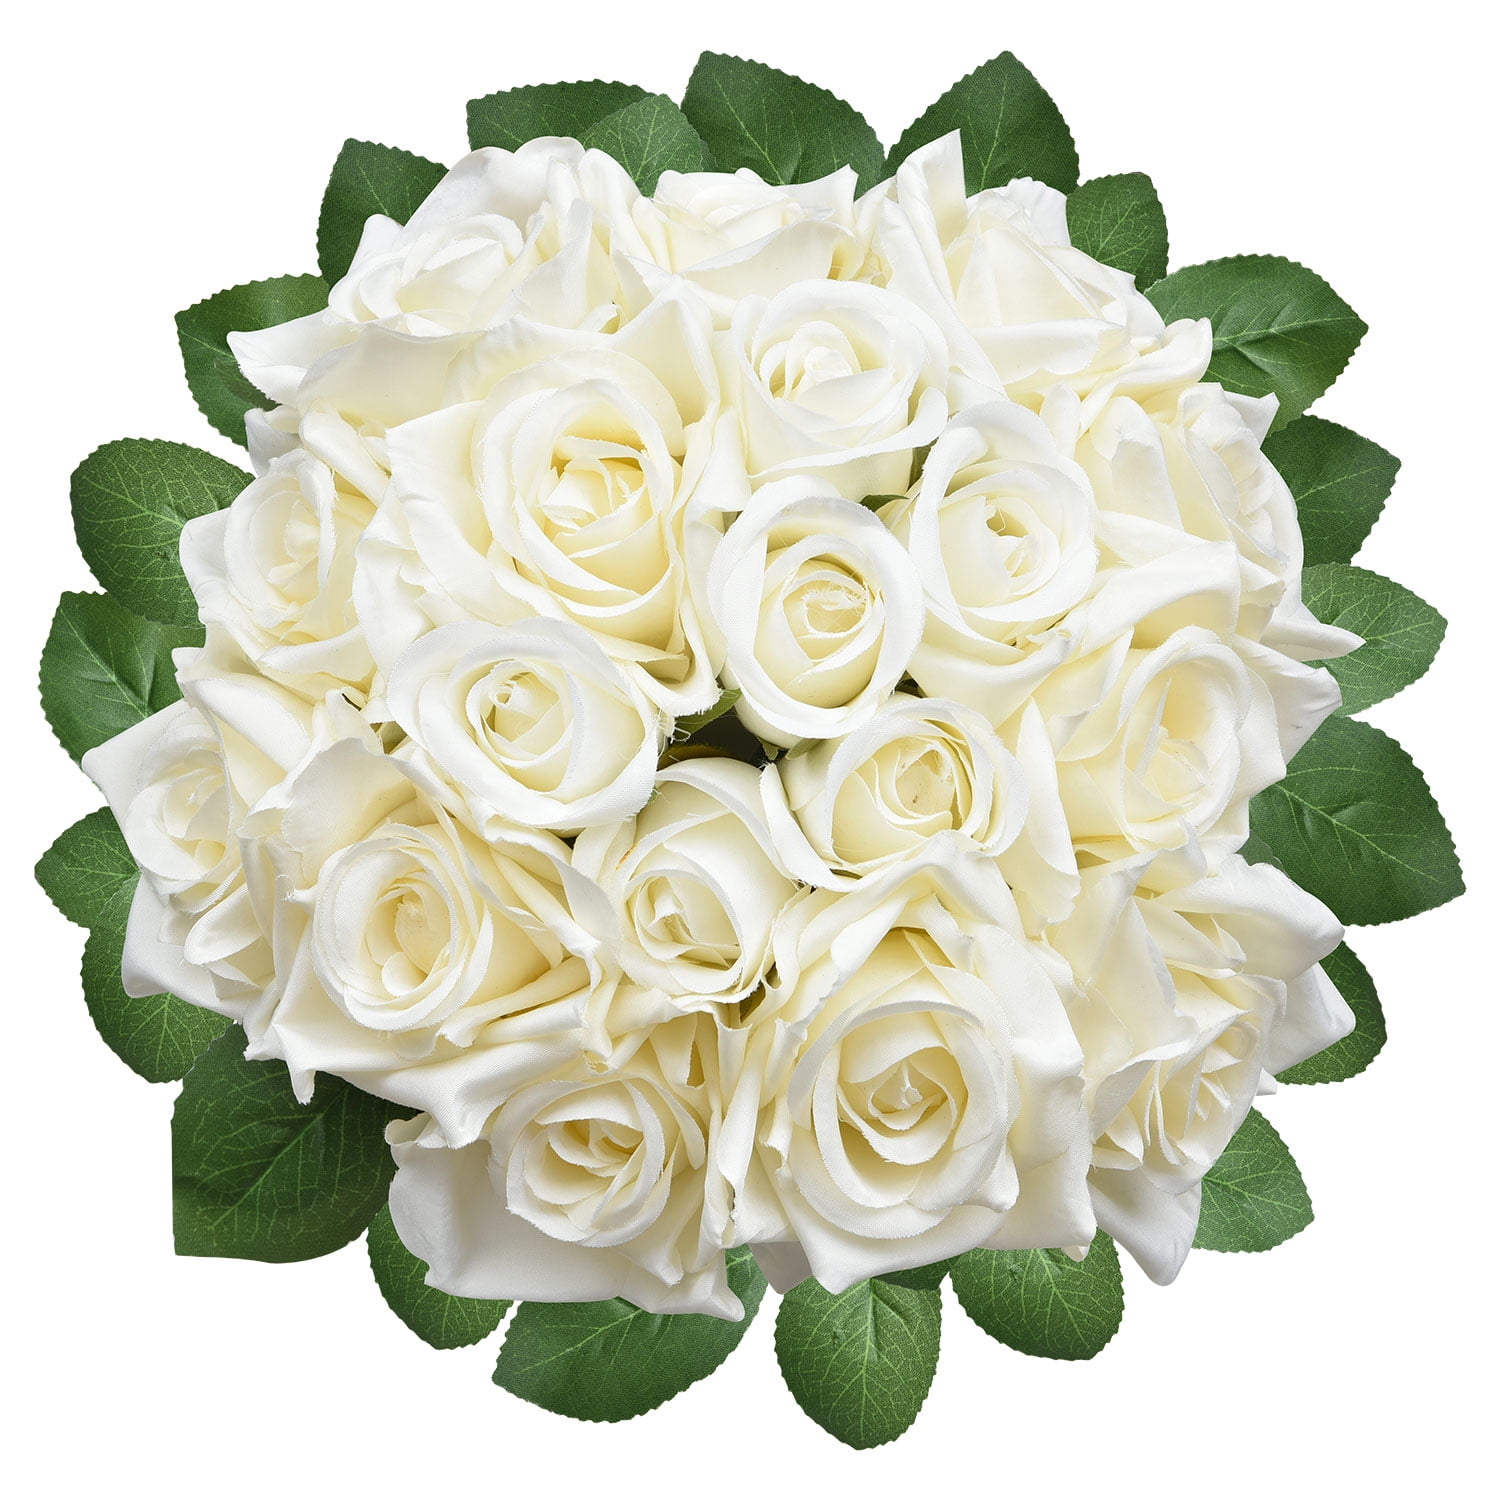 Artificial Roses Flowers Fake Silk Bridal Bouquets Wedding Party Home Decoration 